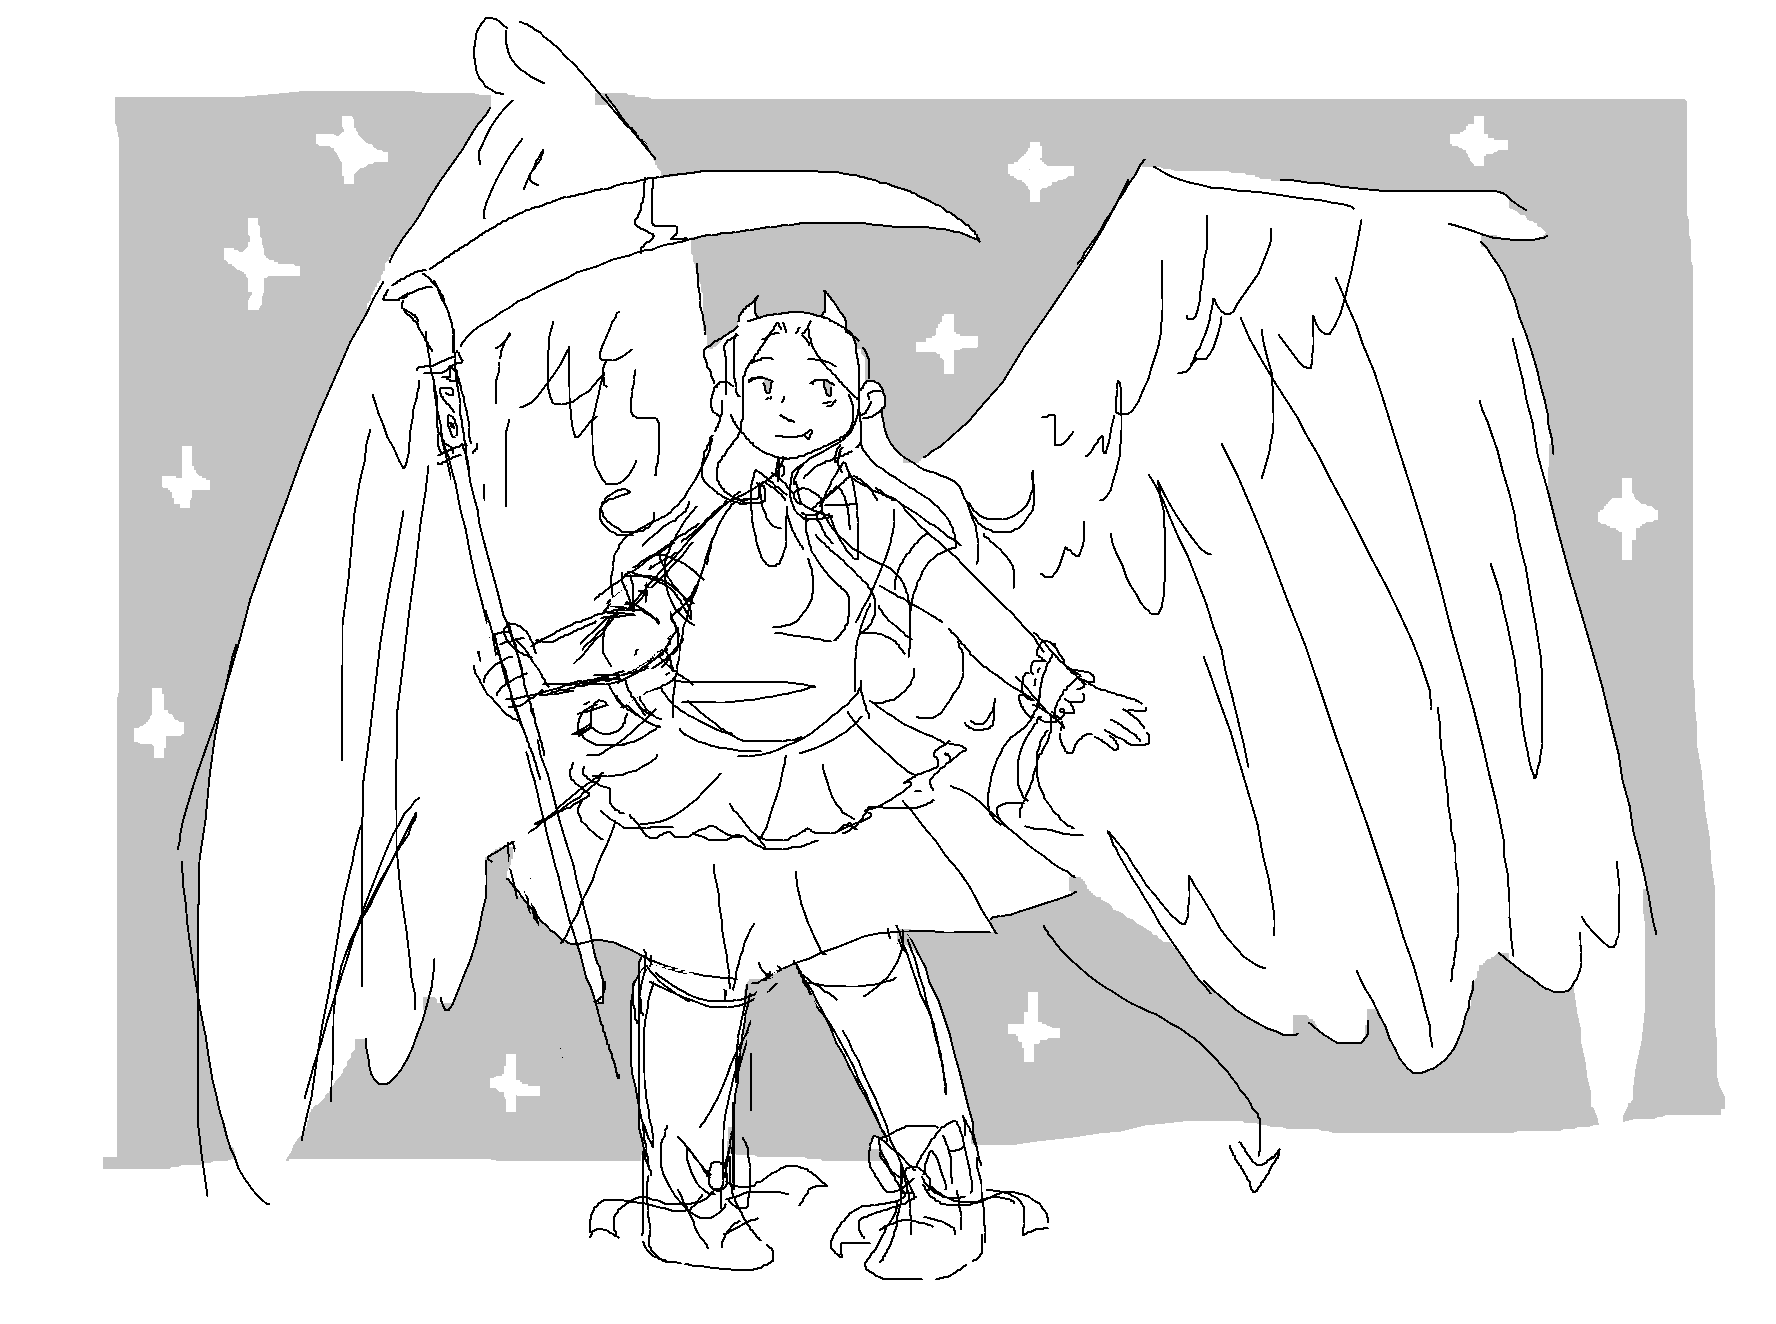 2/10/2024 shitty doodle of myself as a magical girl 4 funsies